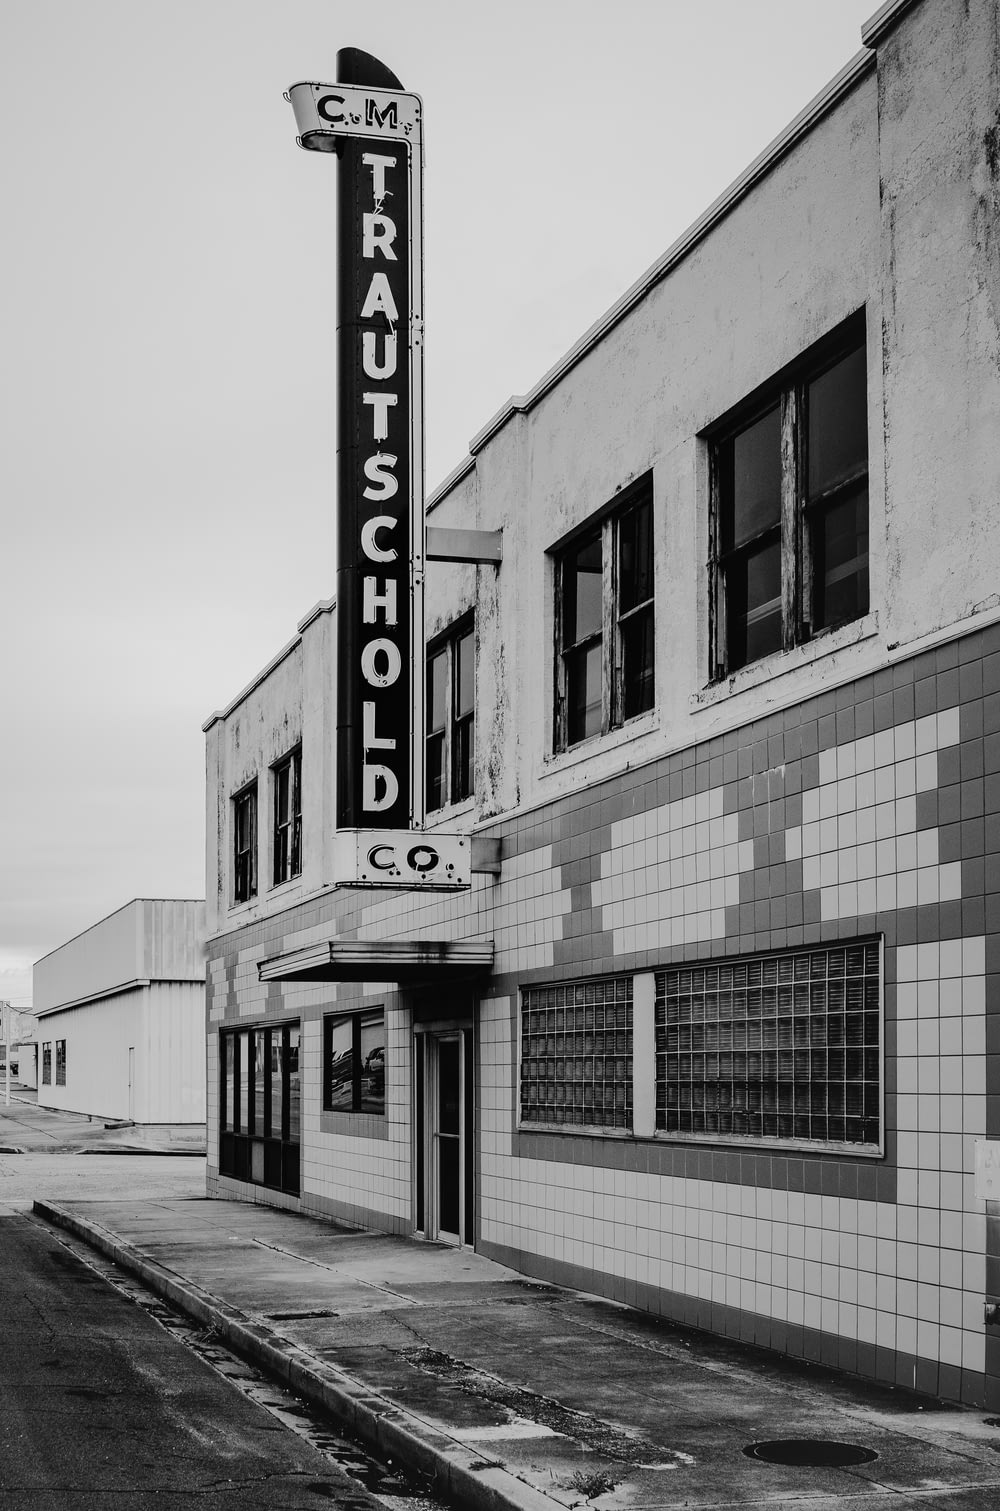 grayscale photo of Trautschold building